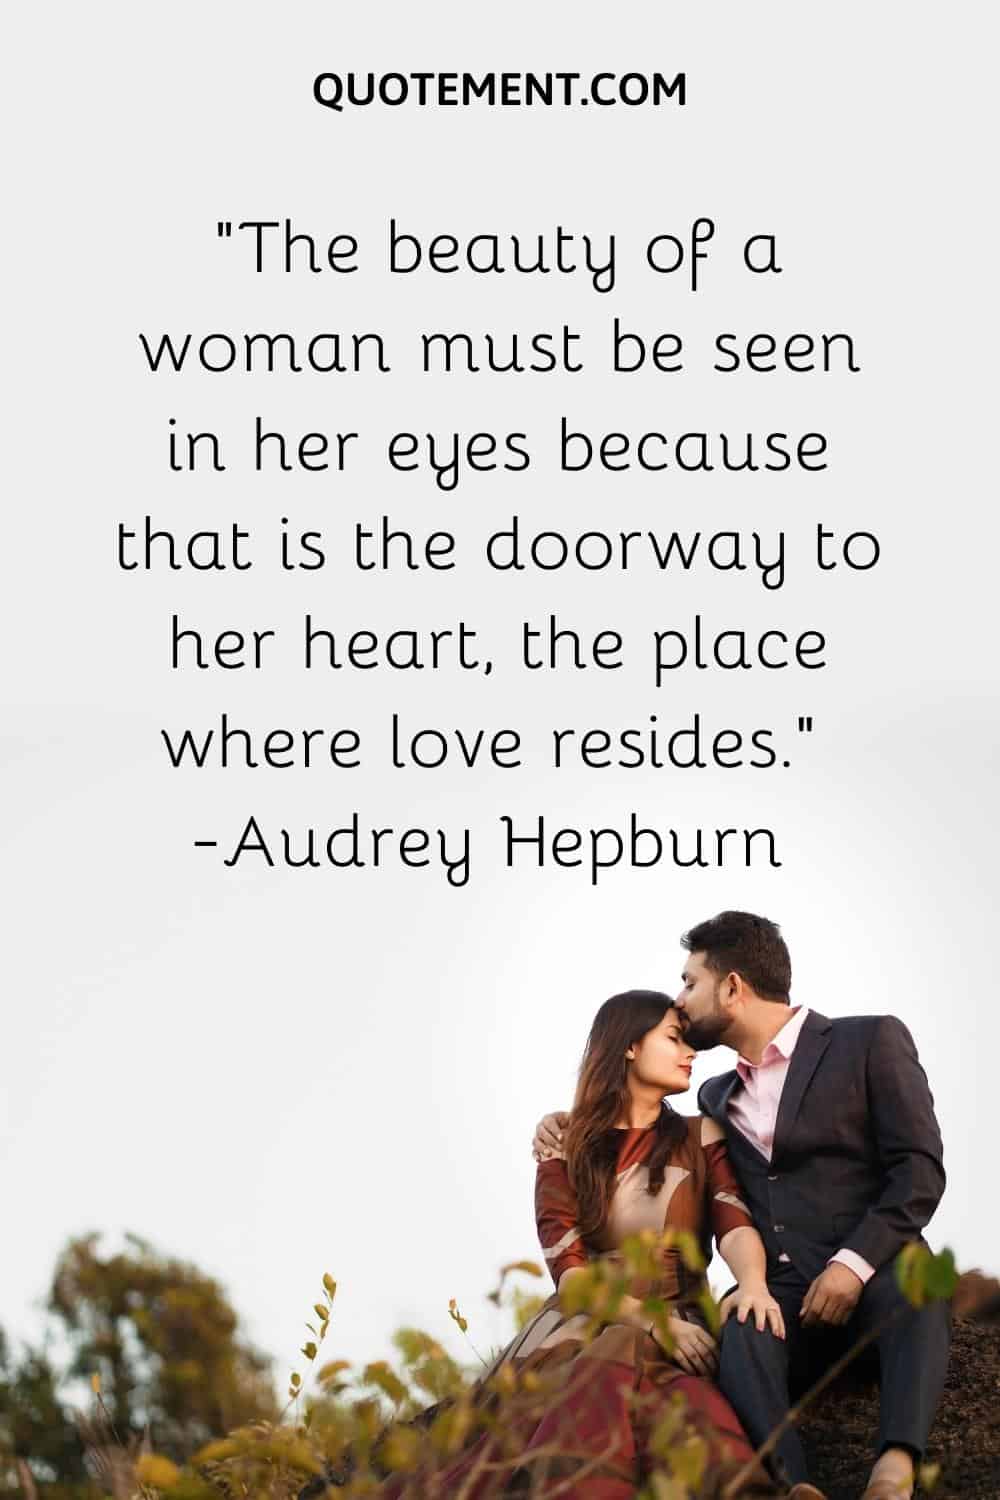 The beauty of a woman must be seen in her eyes because that is the doorway to her heart, the place where love resides